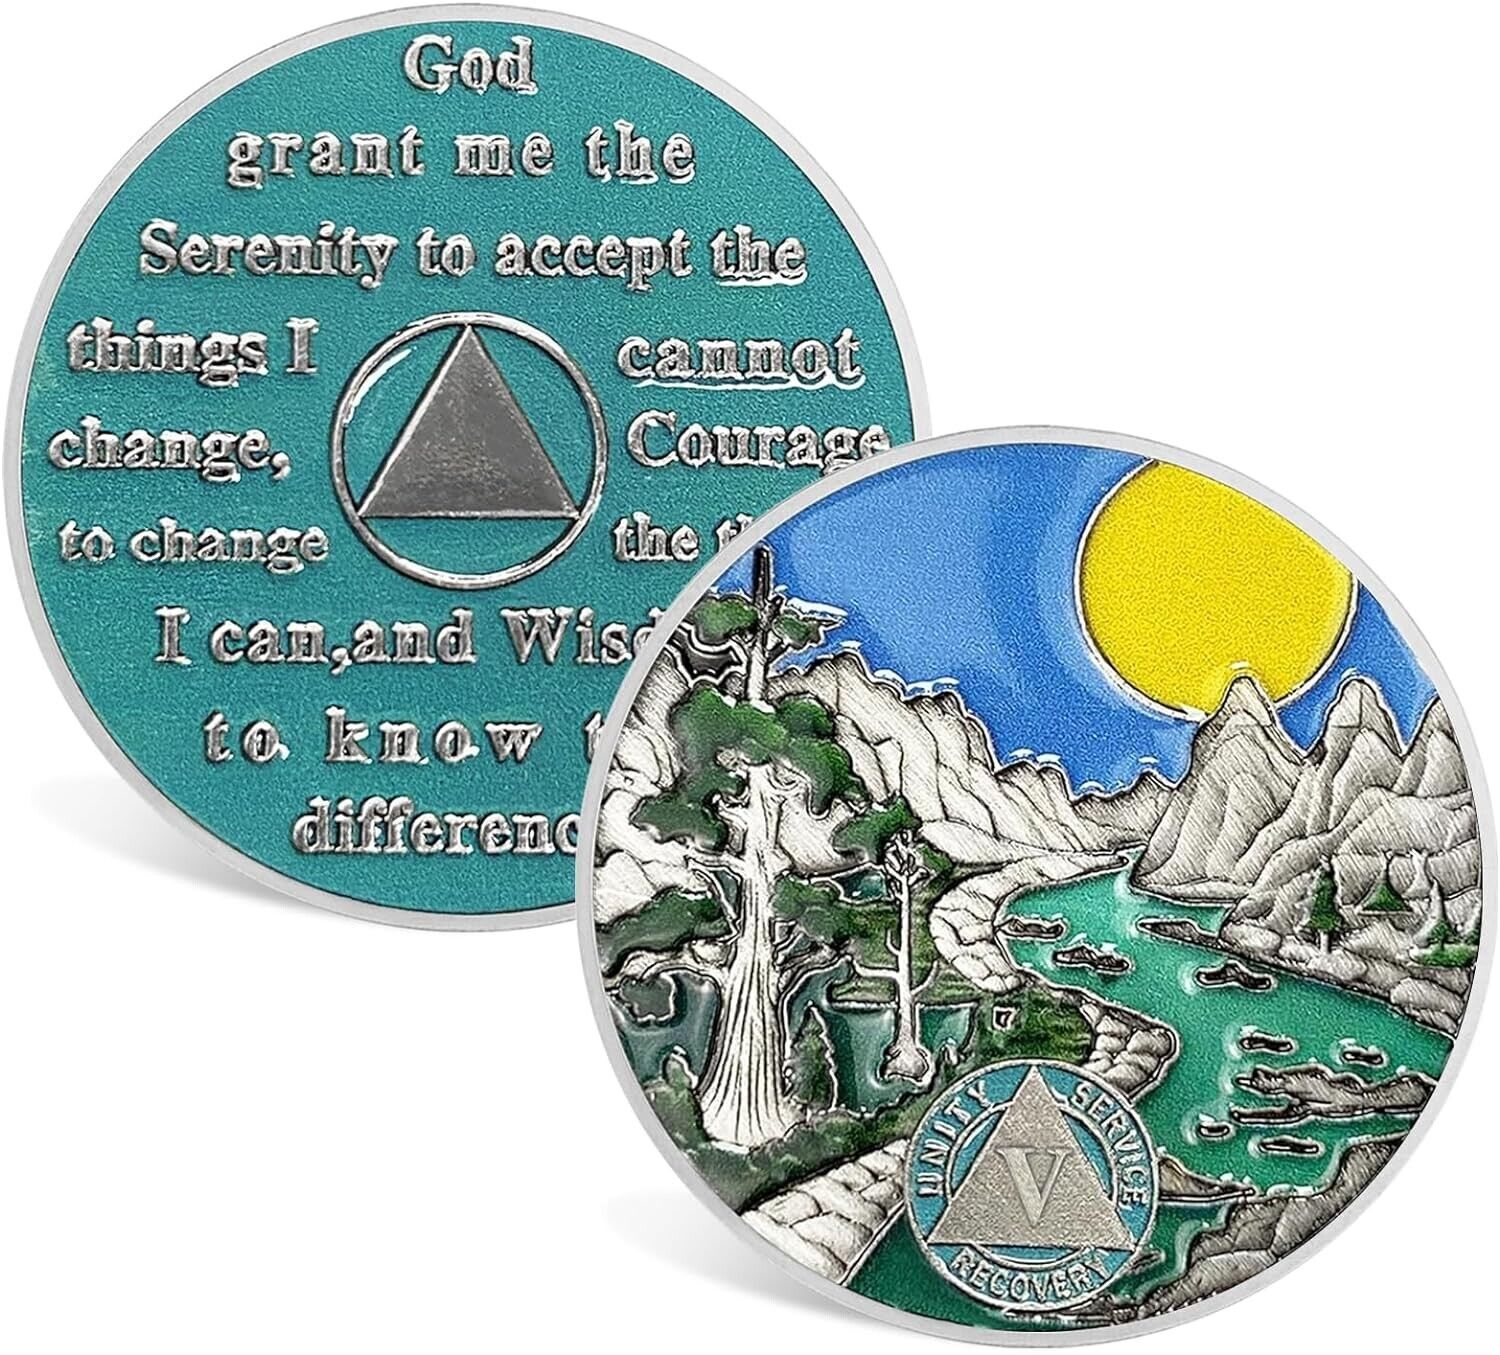 5 Year Sobriety Chip Five Year Sober Coin Achievement Medallions Sobriety Gifts